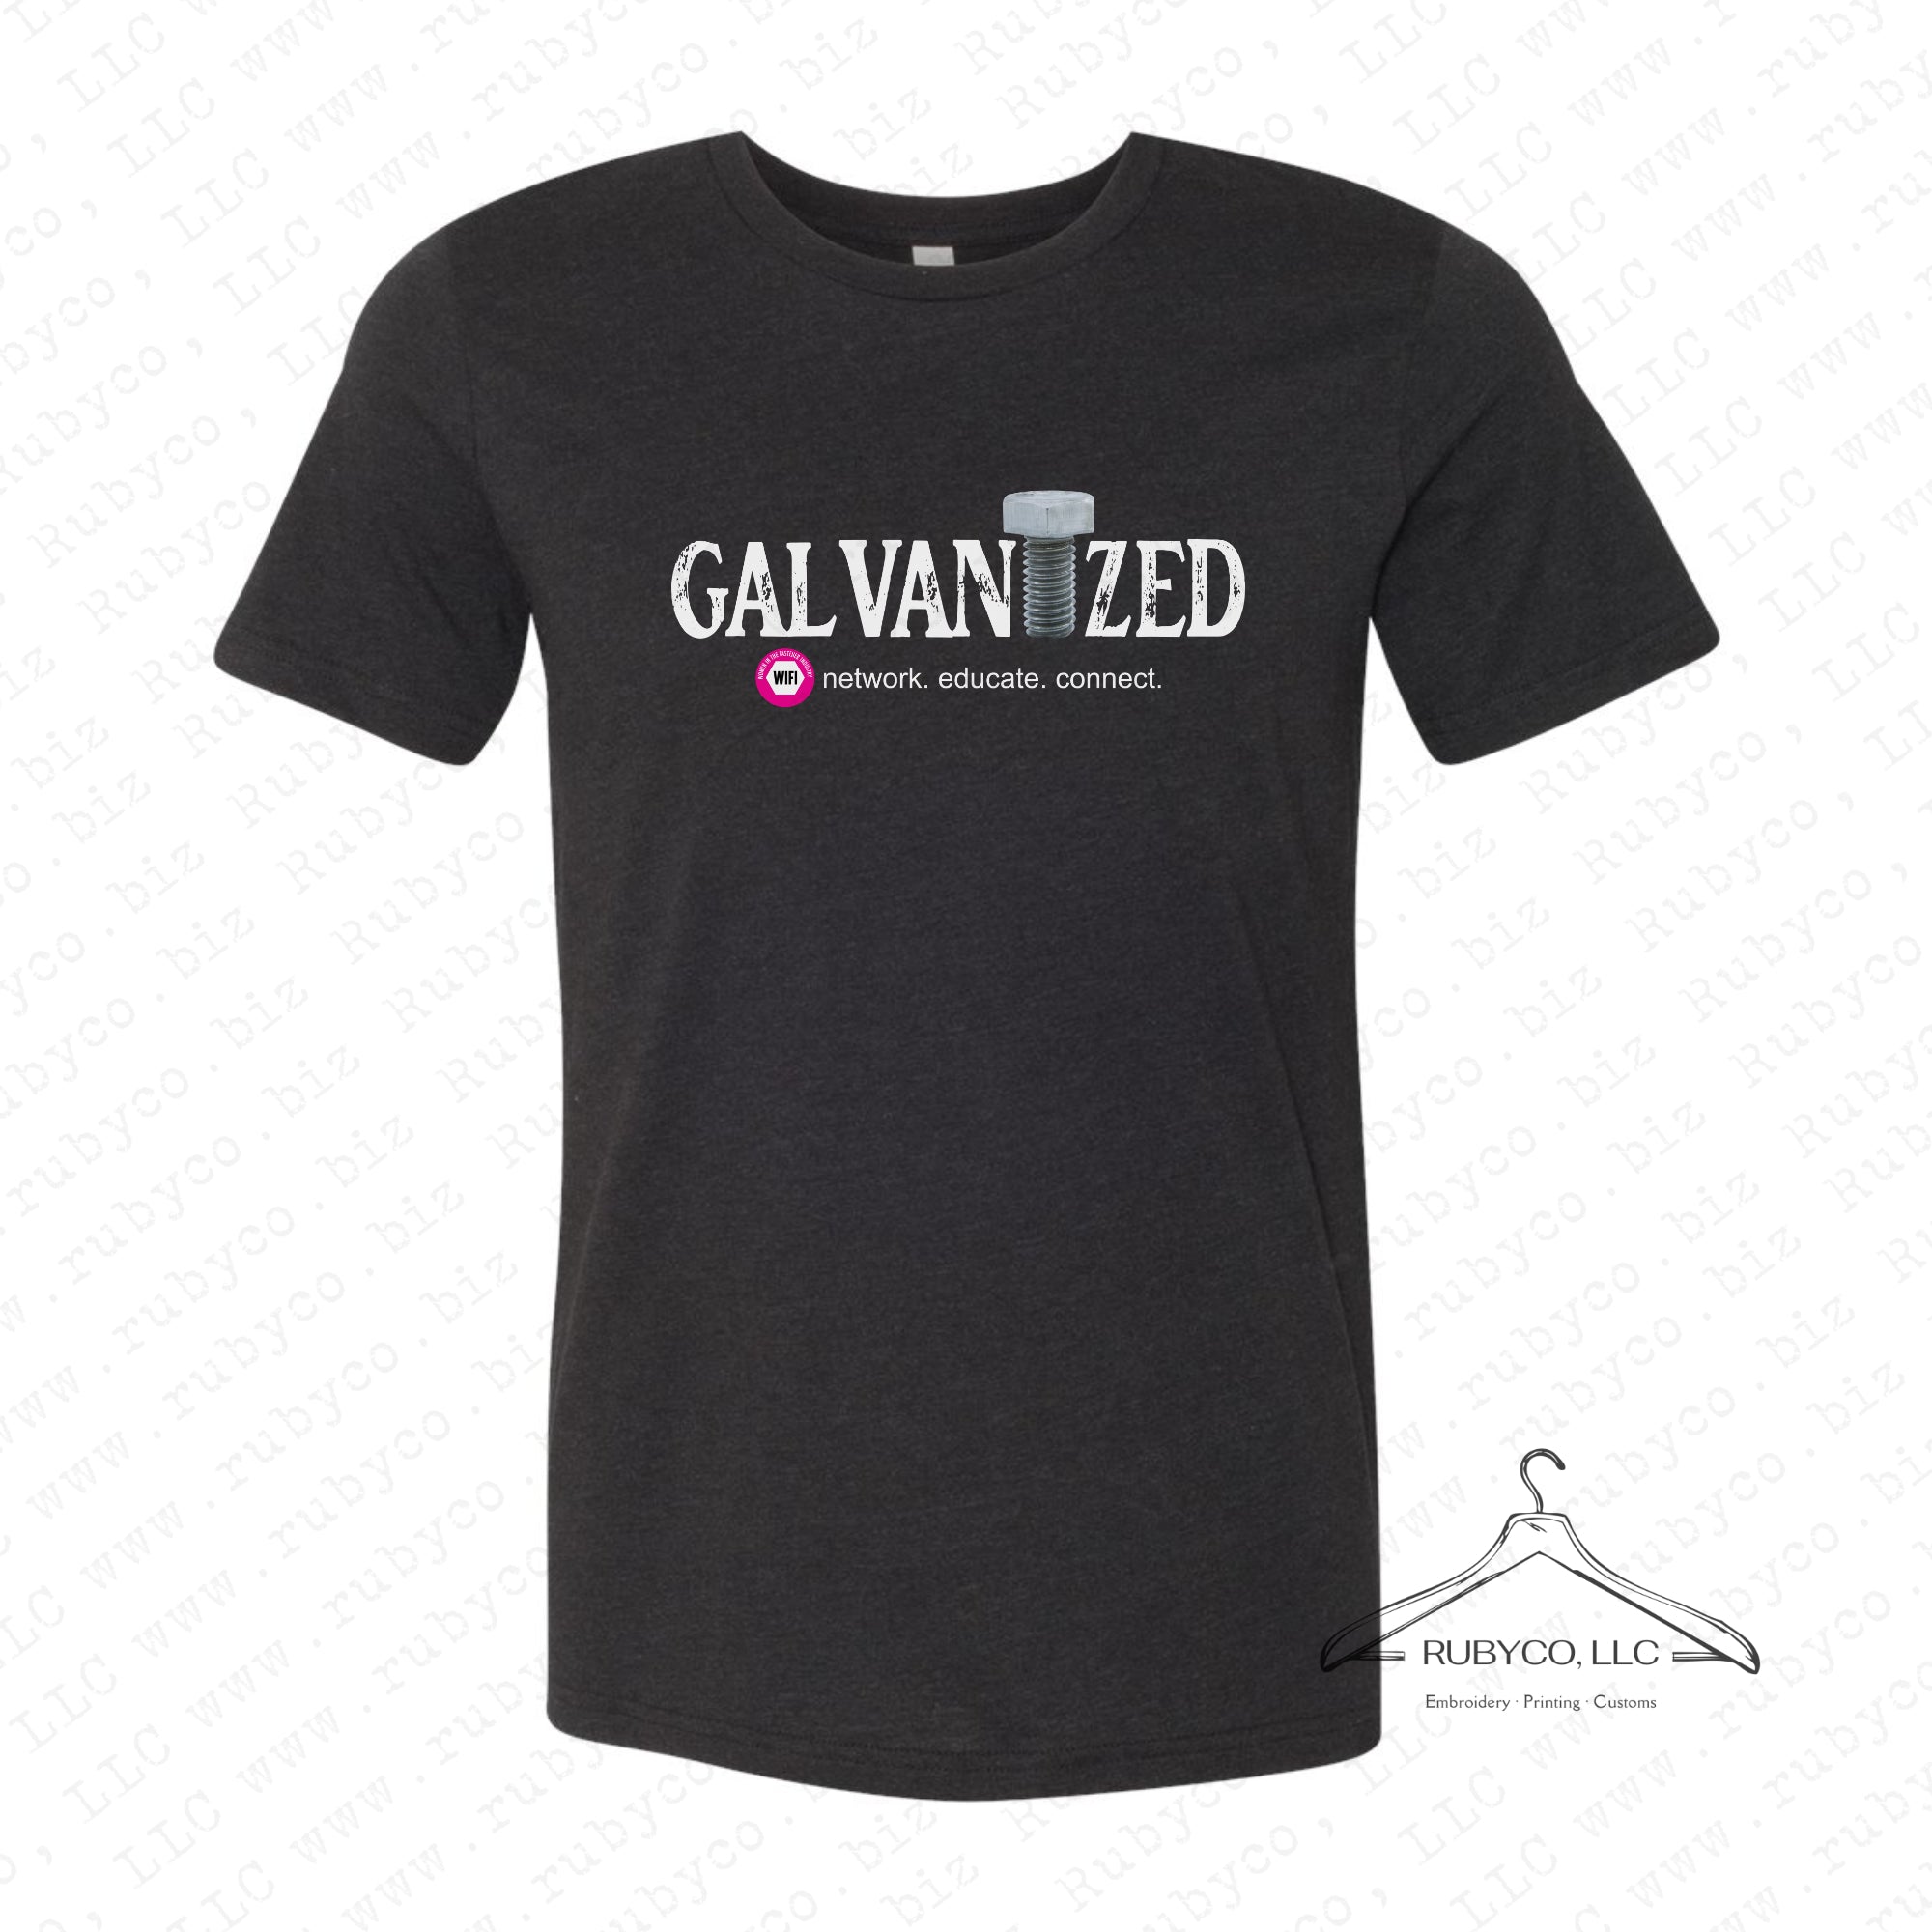 GALVANIZED - Unisex Tee - Made Exclusively for Women in the Fastener Industry Association